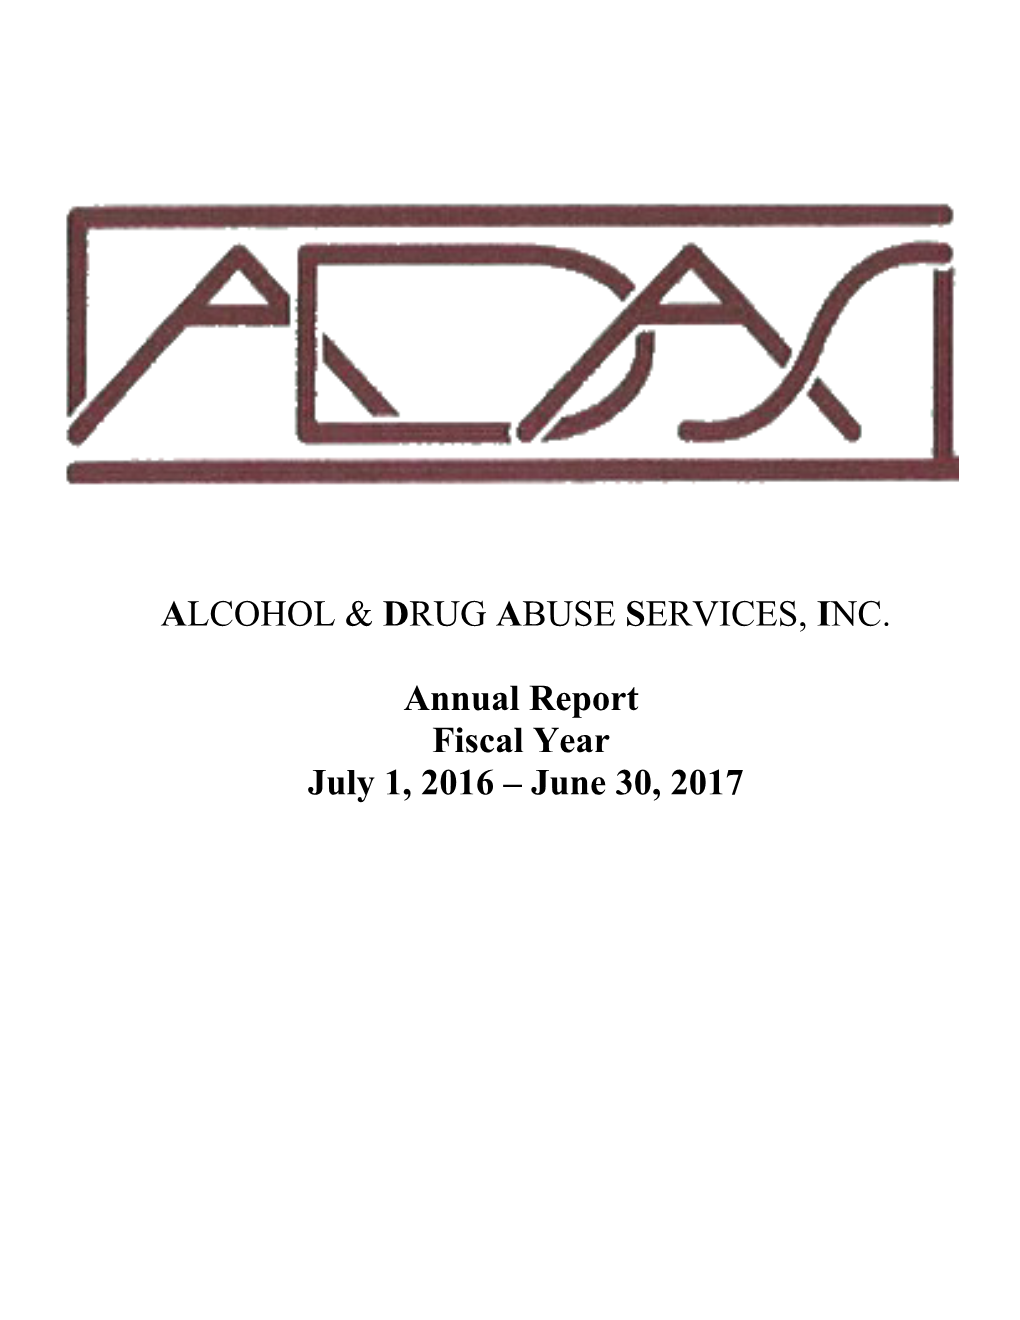 Alcohol & Drug Abuse Services, Inc. Annual Report Fiscal Year July 1, 2013 June 30, 2014